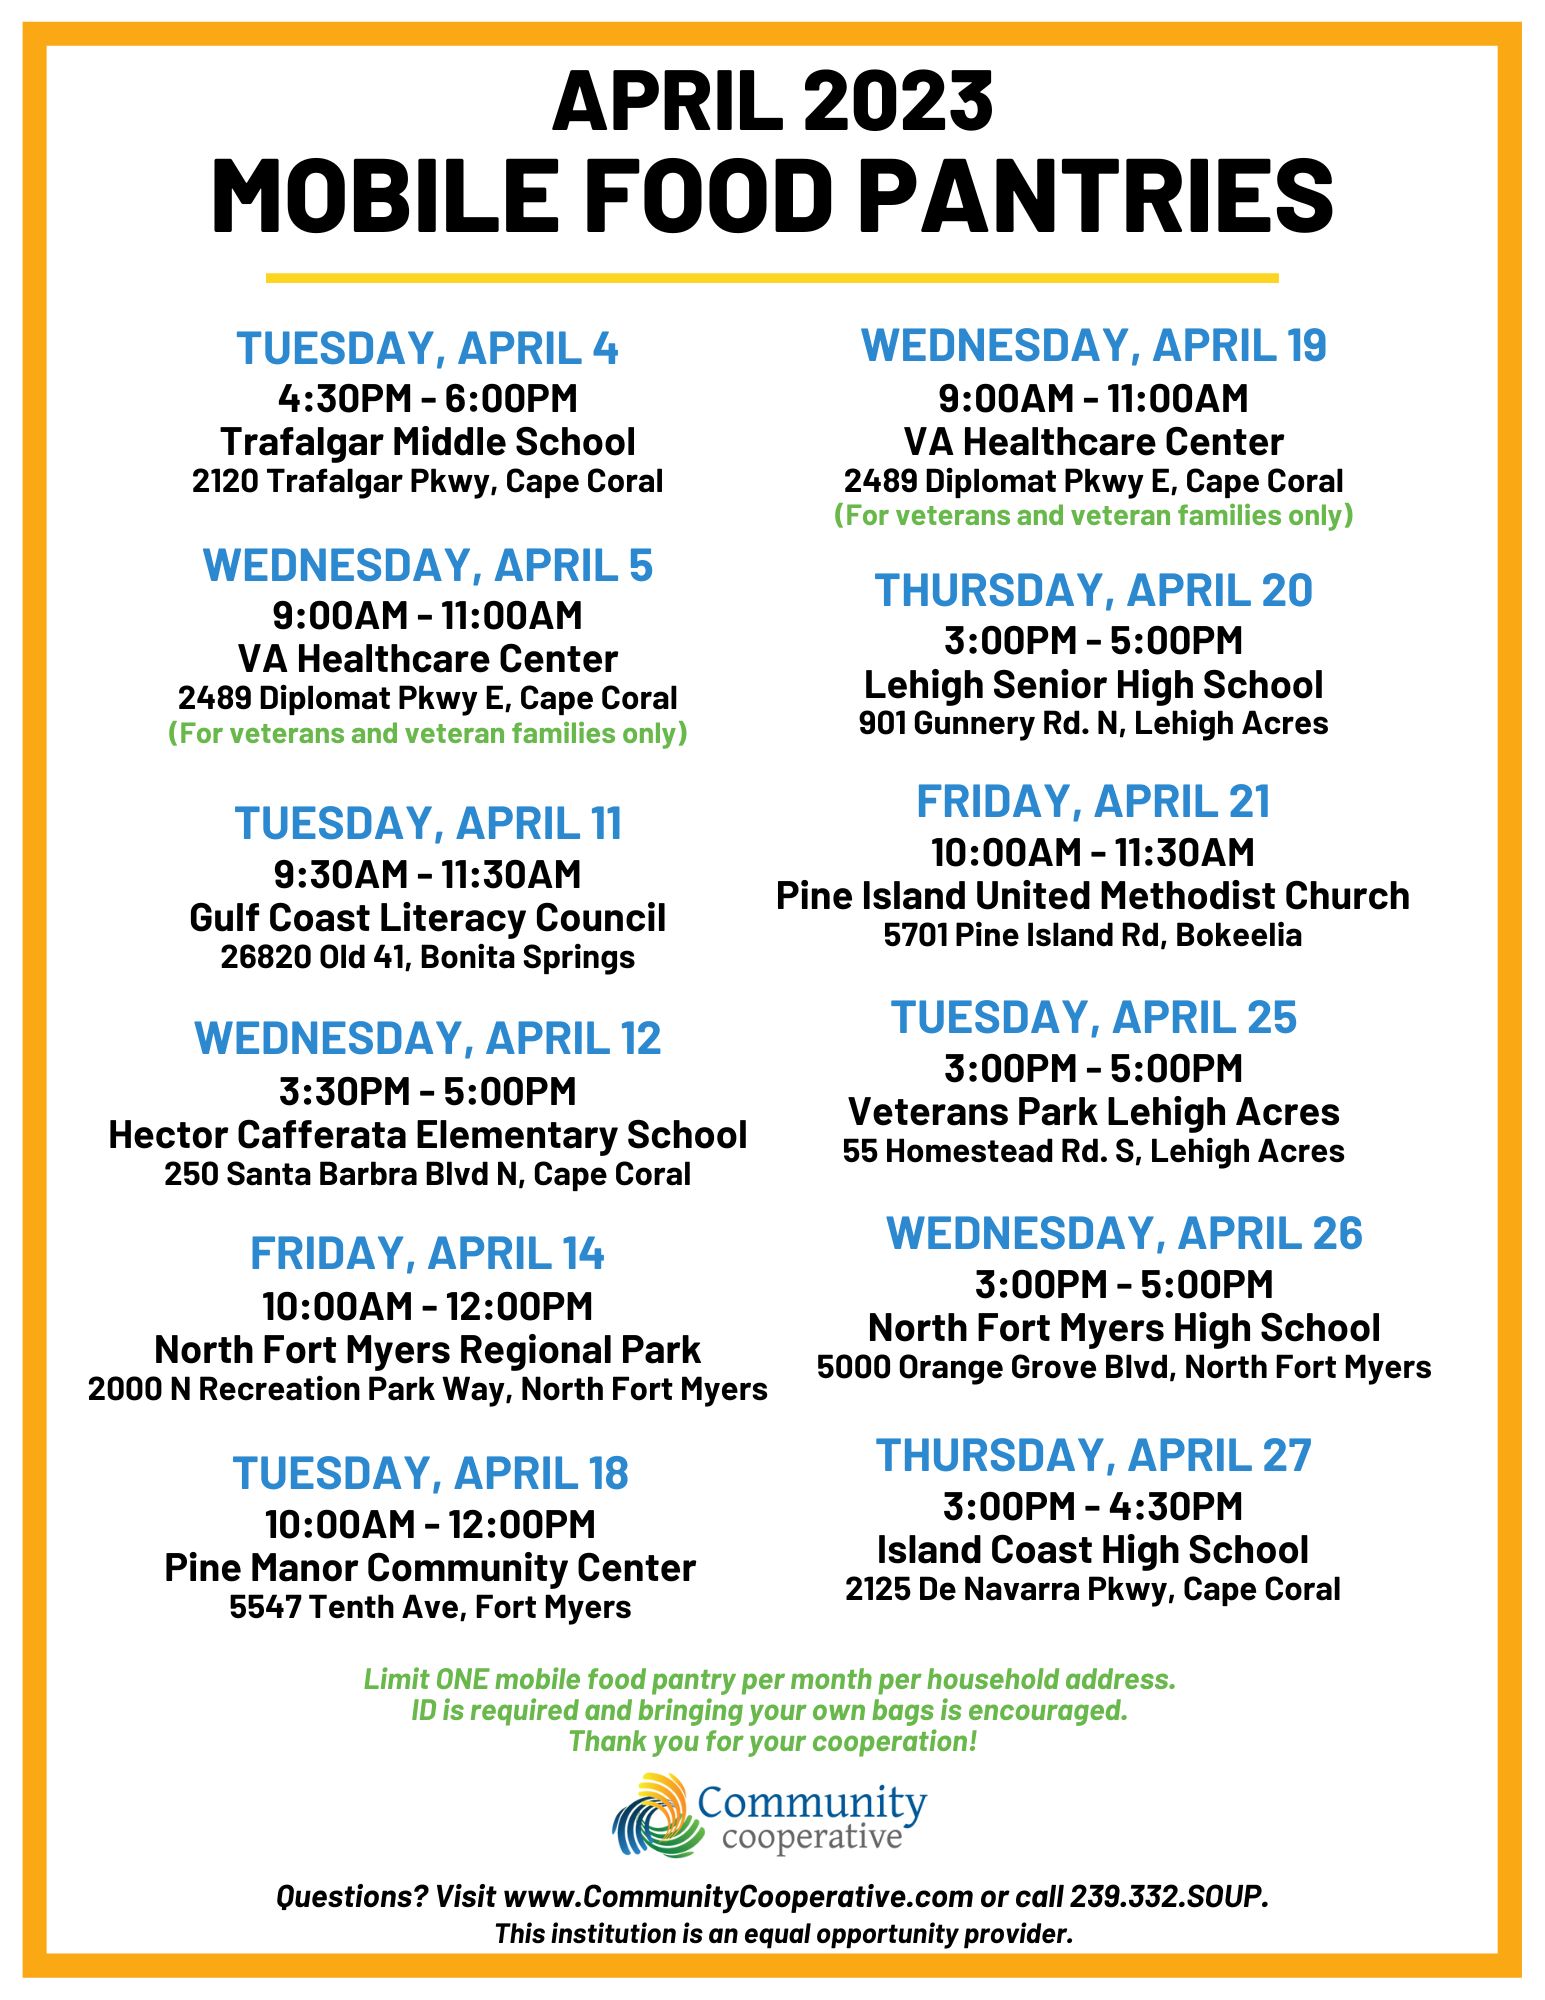 Community Cooperative Announces April Mobile Food Pantry Schedule and